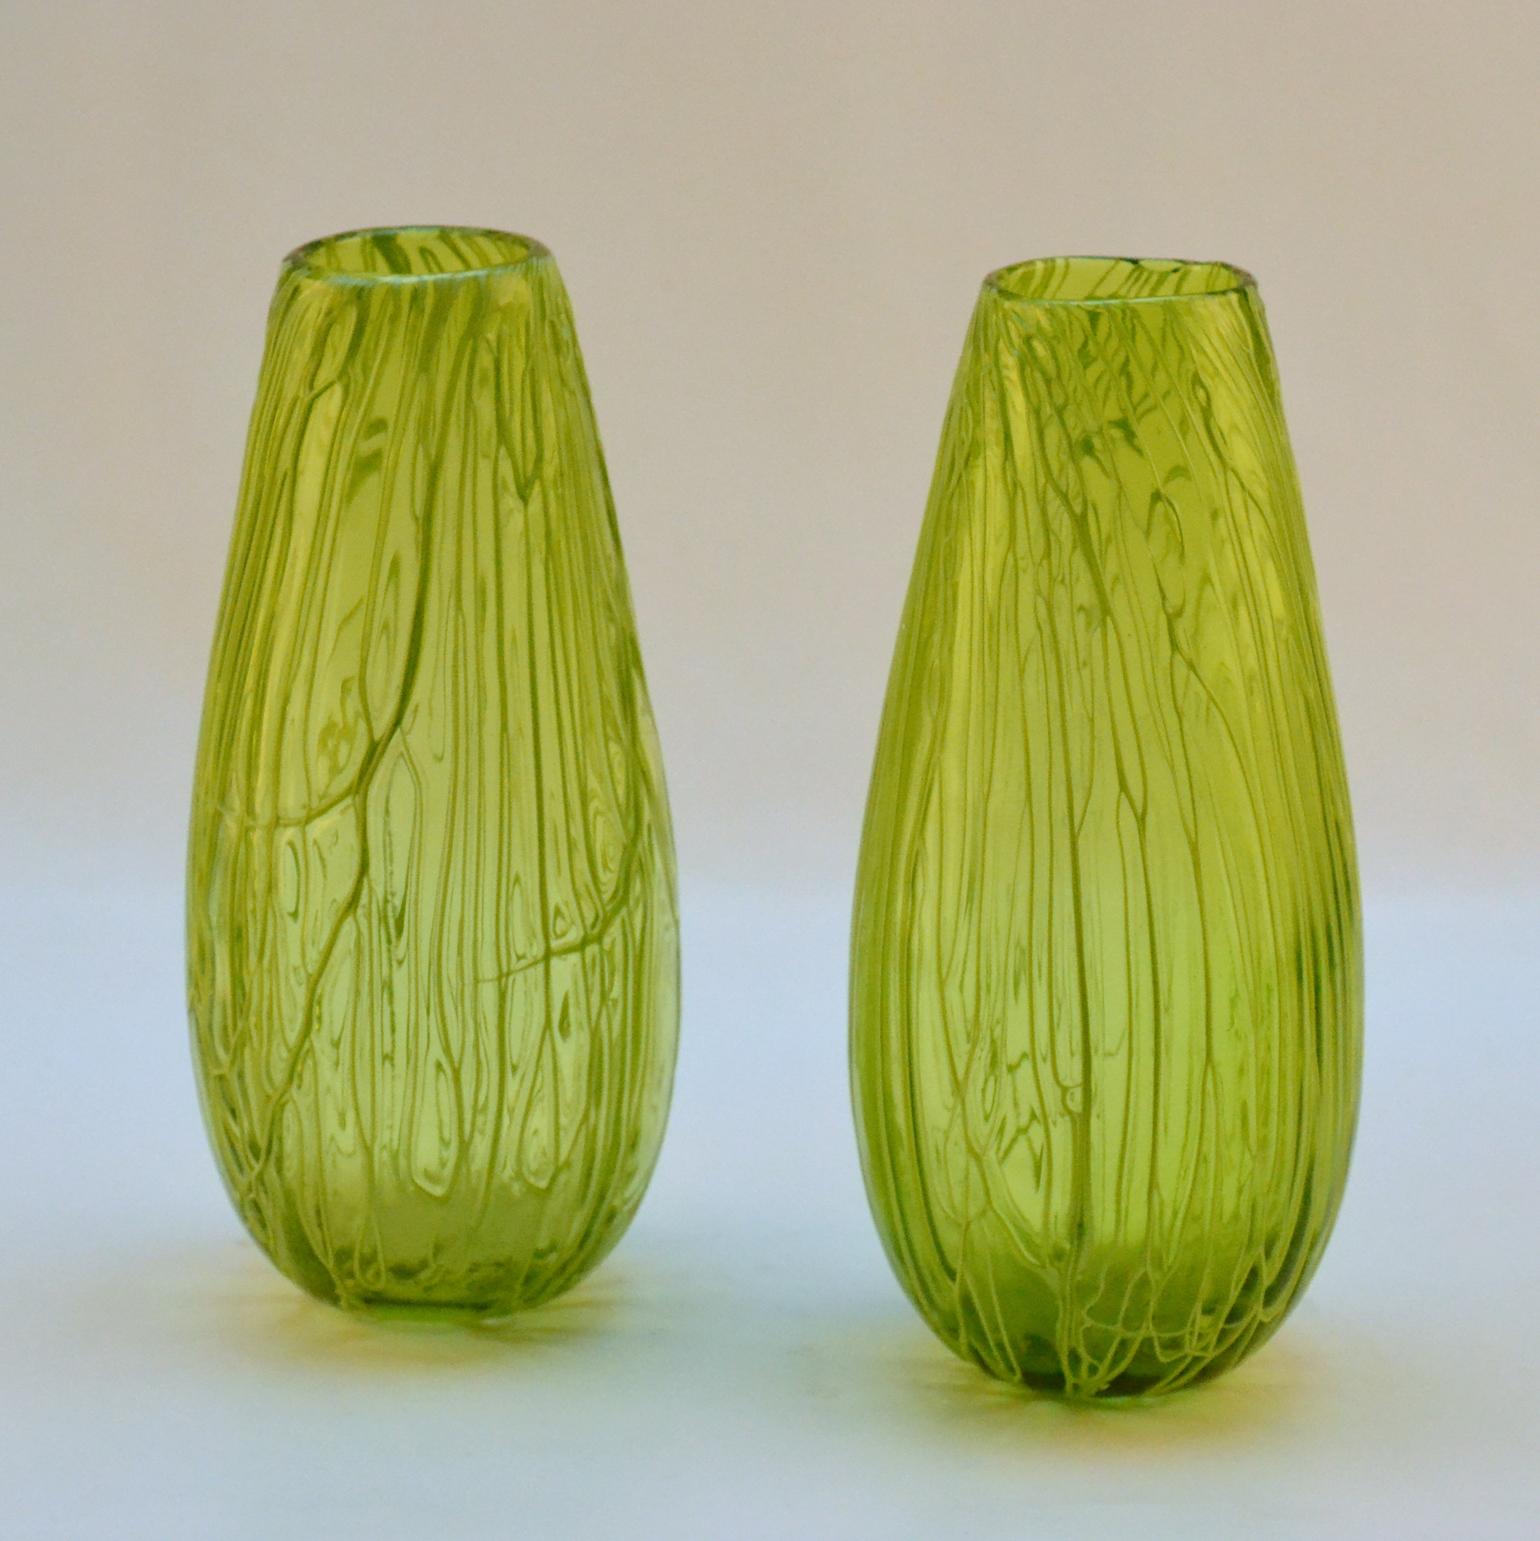 Pair of vivid acid green vases were made using the Caldo technique often used in Murano which involves the spaghetti threads lied over the surface, over its enter body creating this textured string relief, during the hand making process. The simple